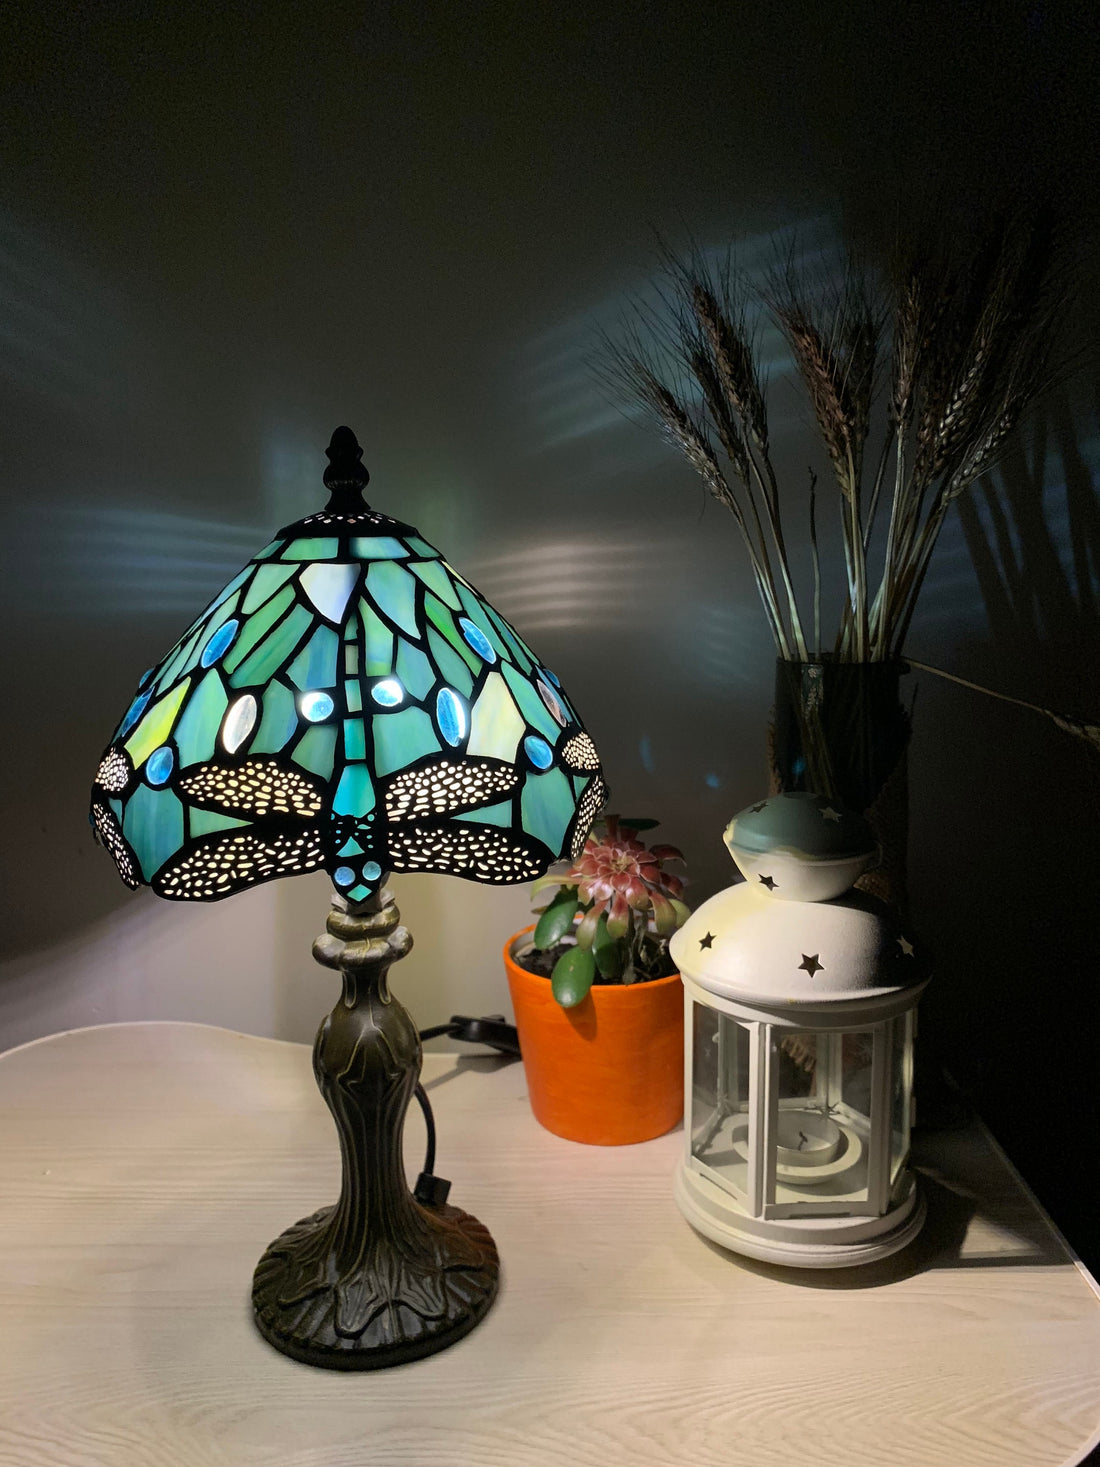 Sea Blue Tiffany Lamp, Dragonfly Style Lamp, Stained Glass, Crystal Bead Lampshade, Stained Glass Lamp Shade, Bedside Lamp,